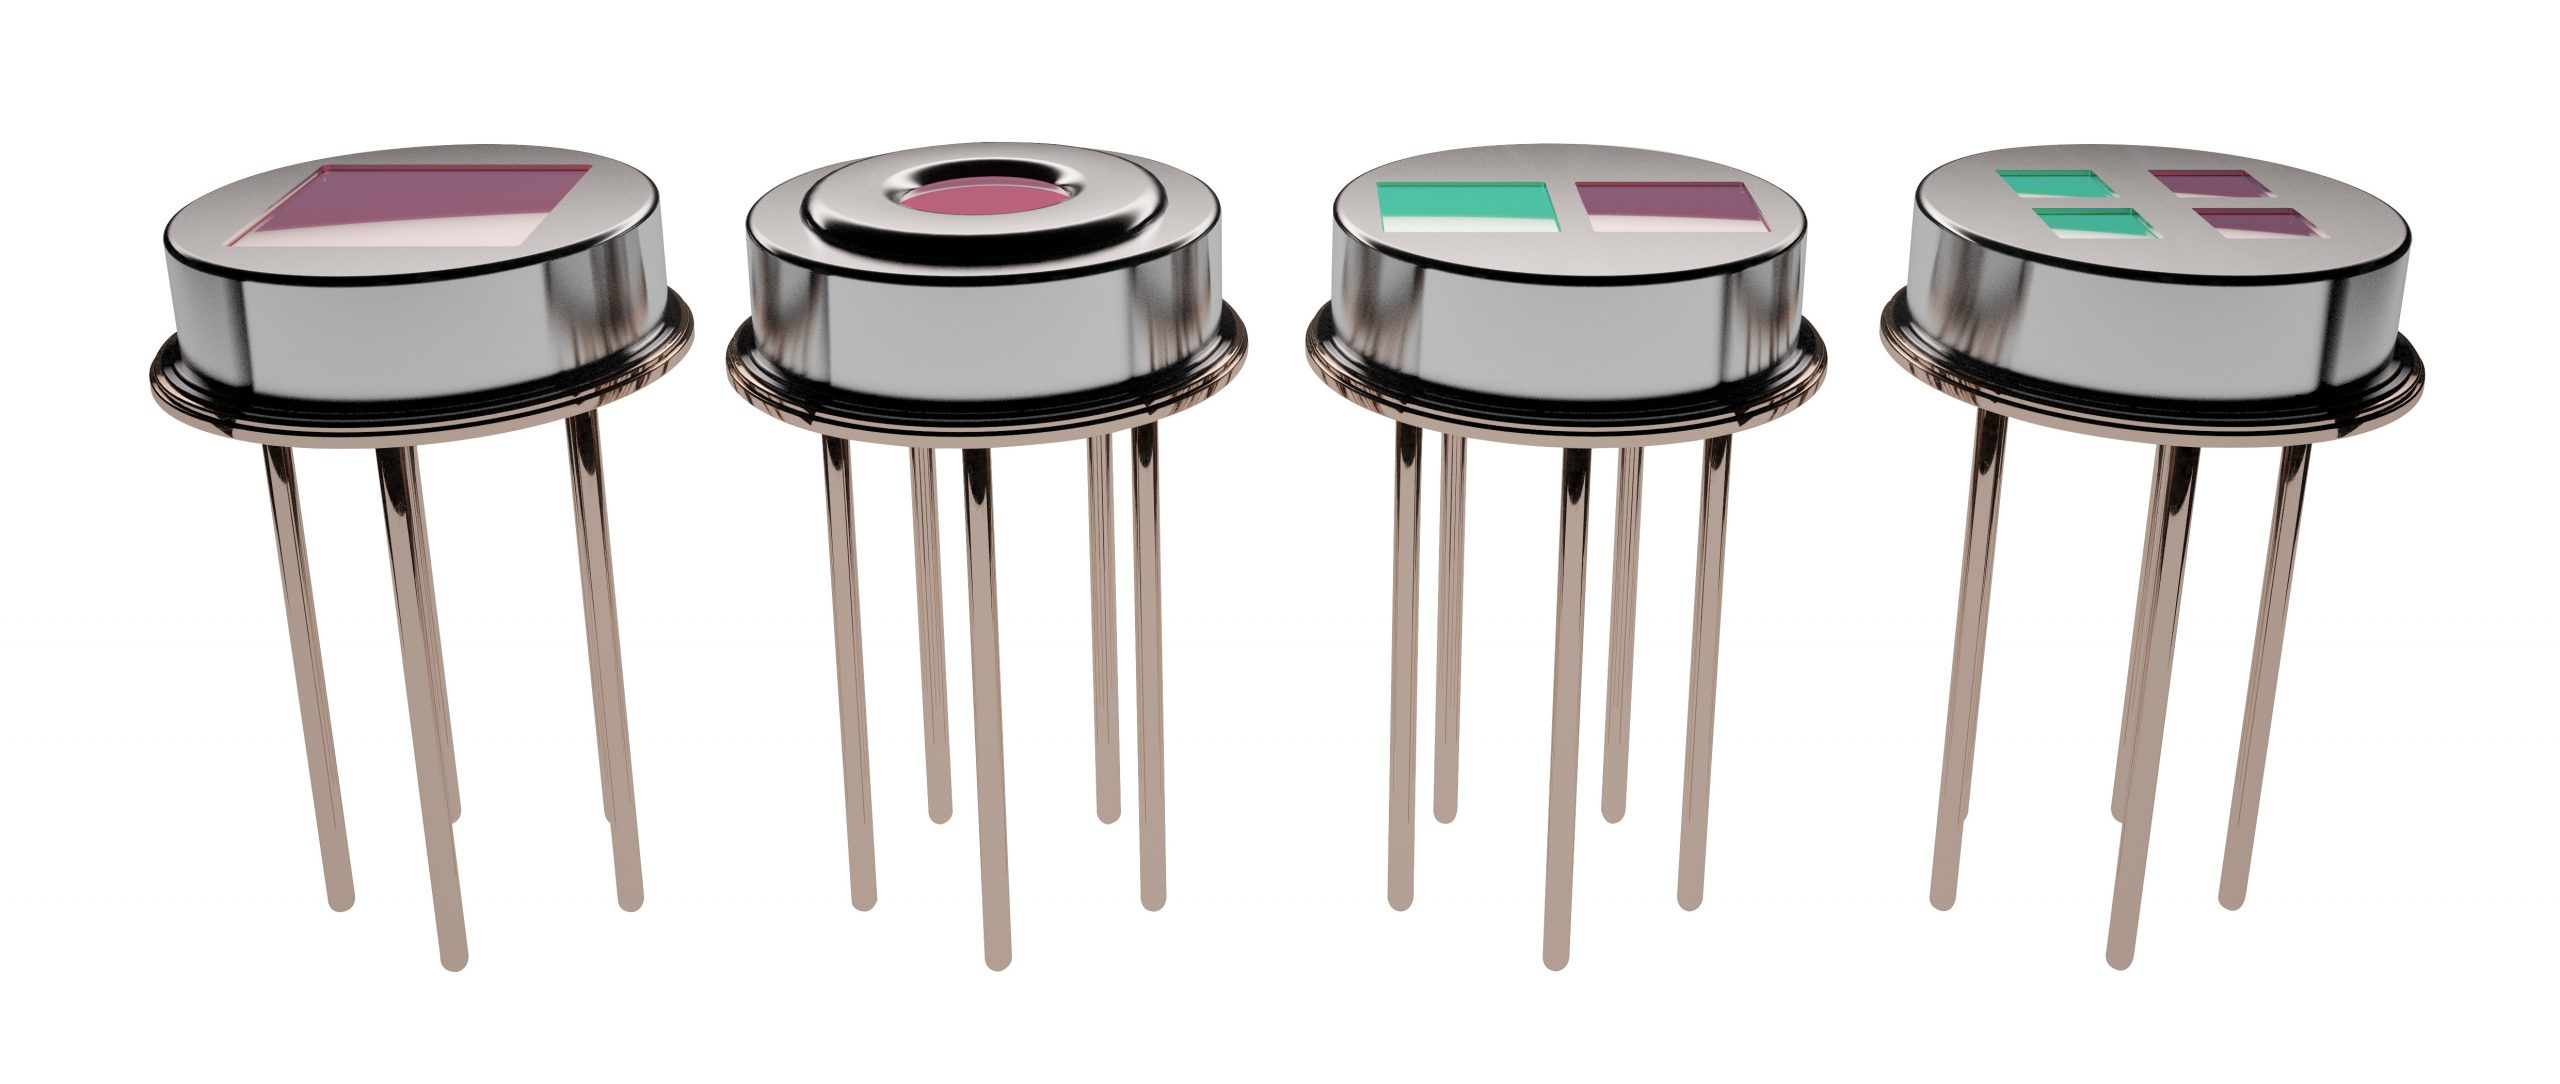 Pyreos announces TO-39 quad detectors for multi-gas and flame detection